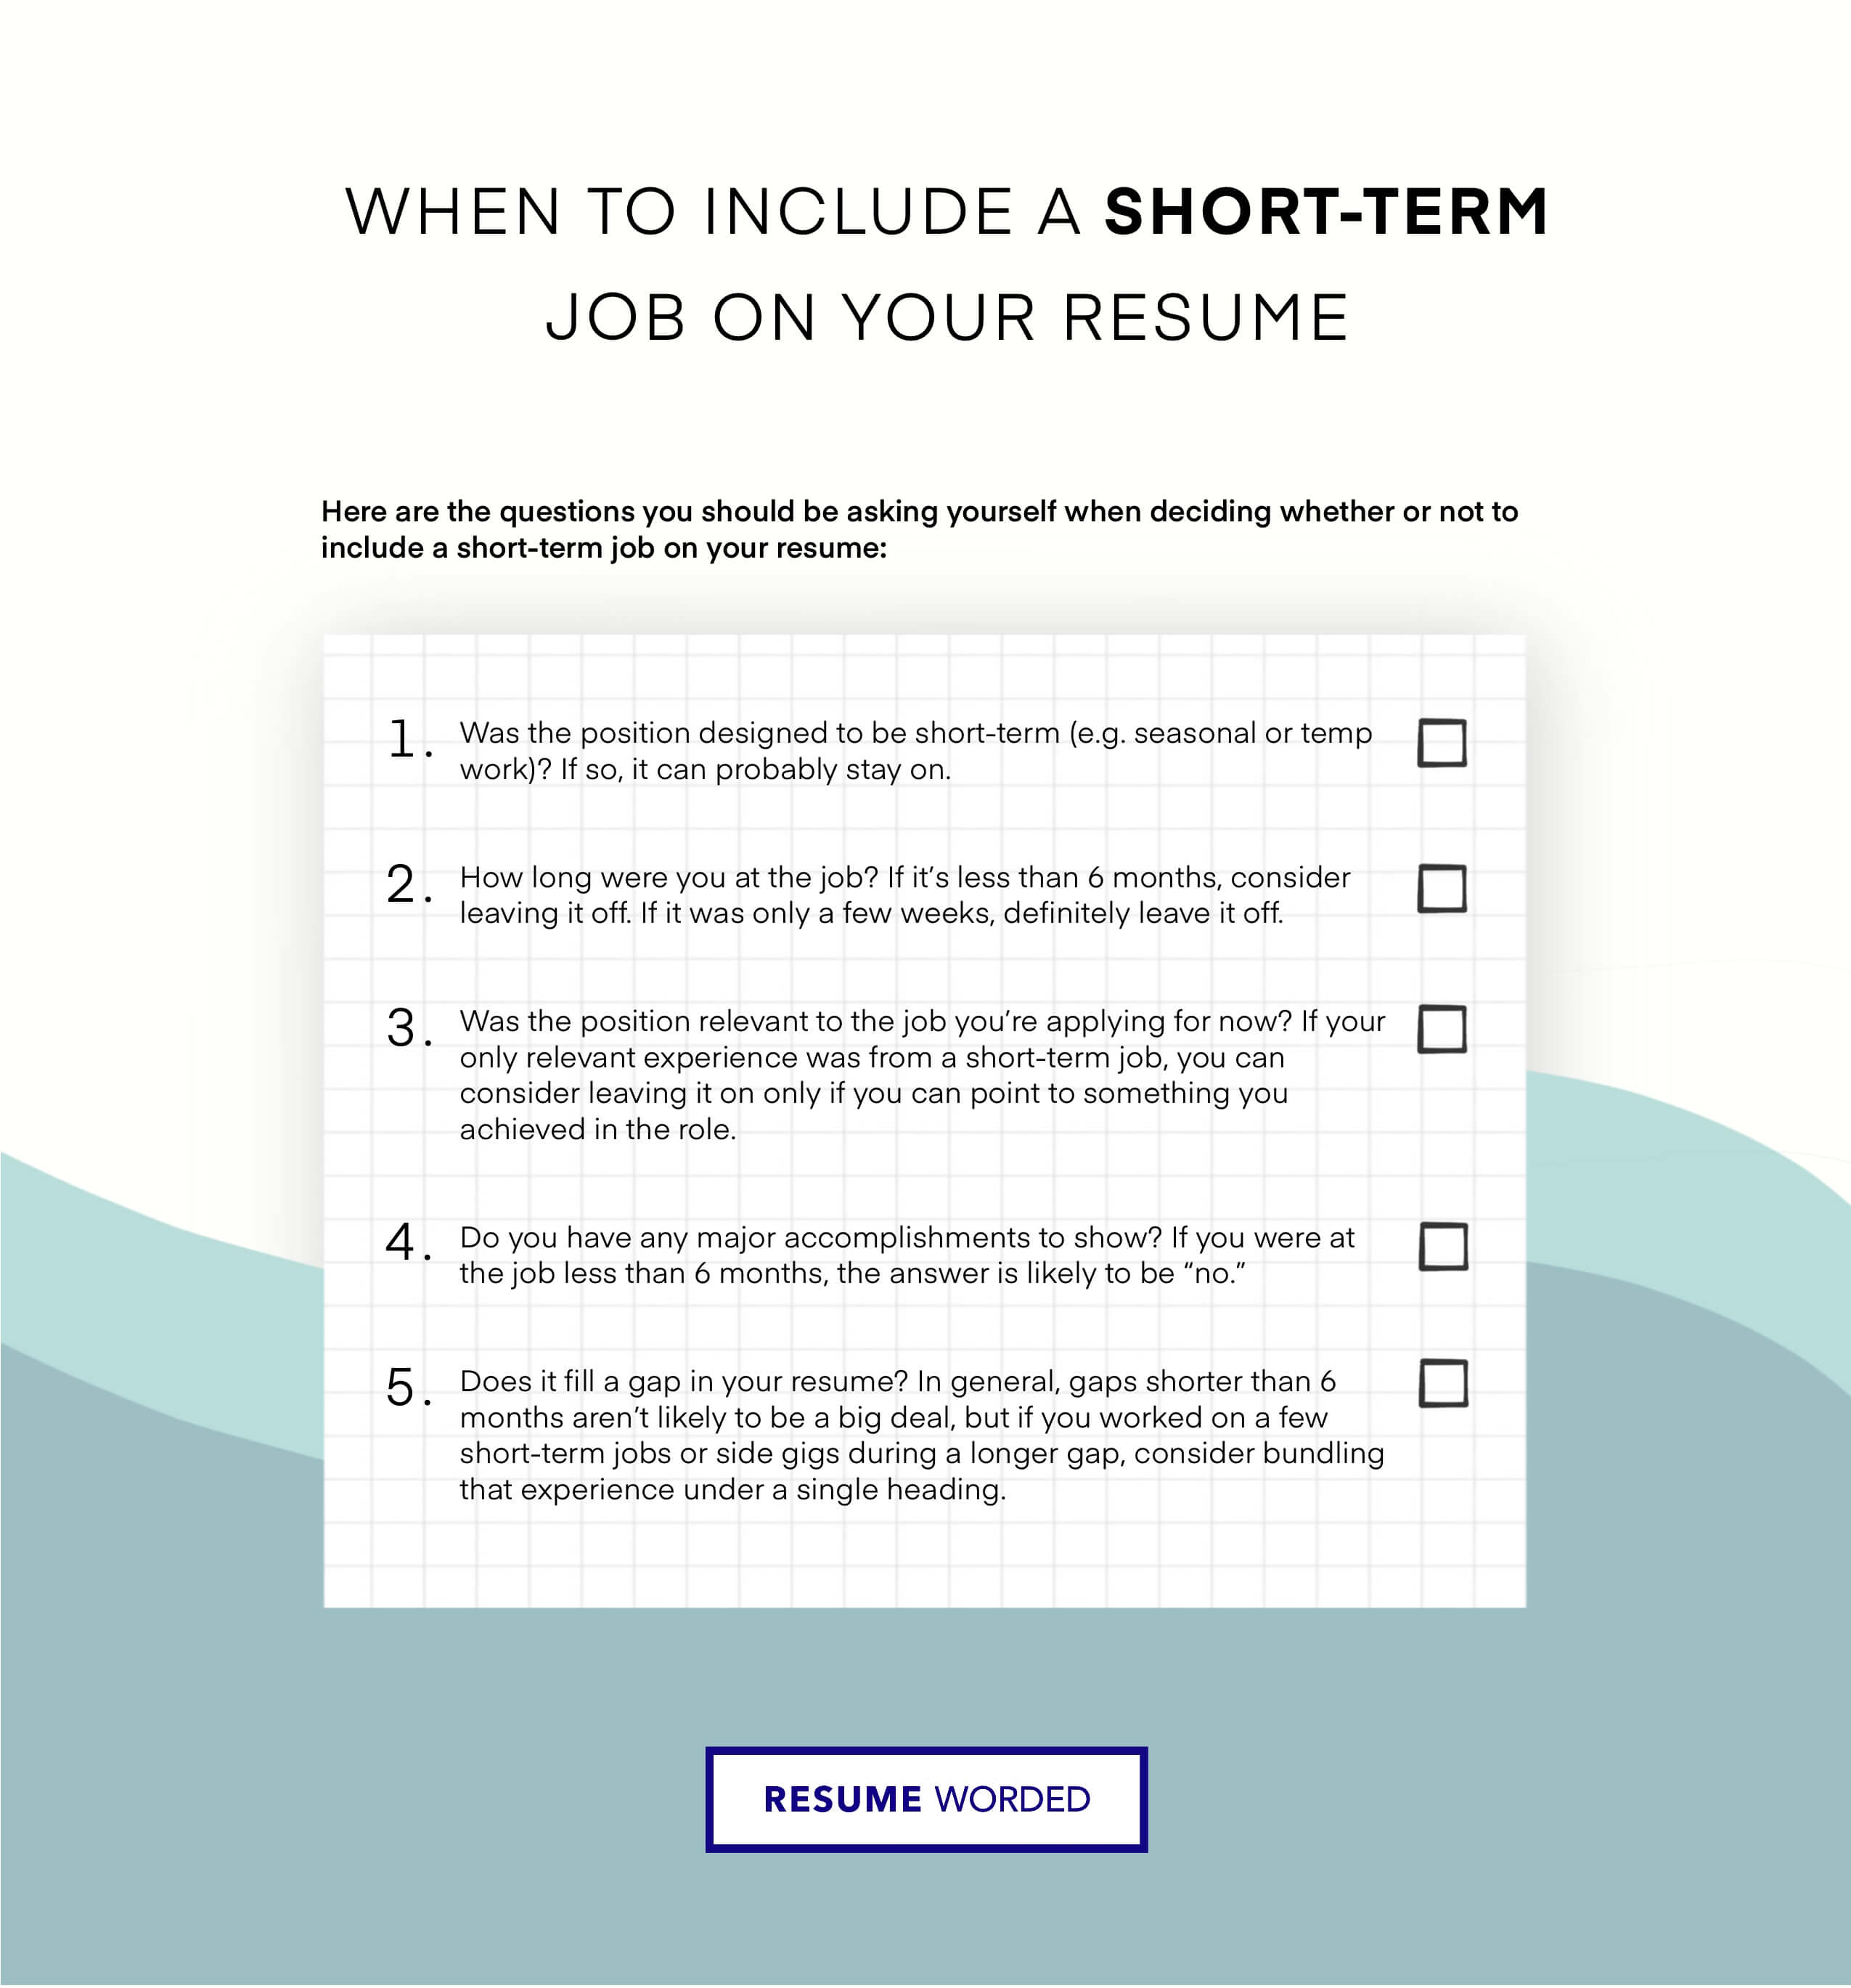 When to keep a short-term job on your resume